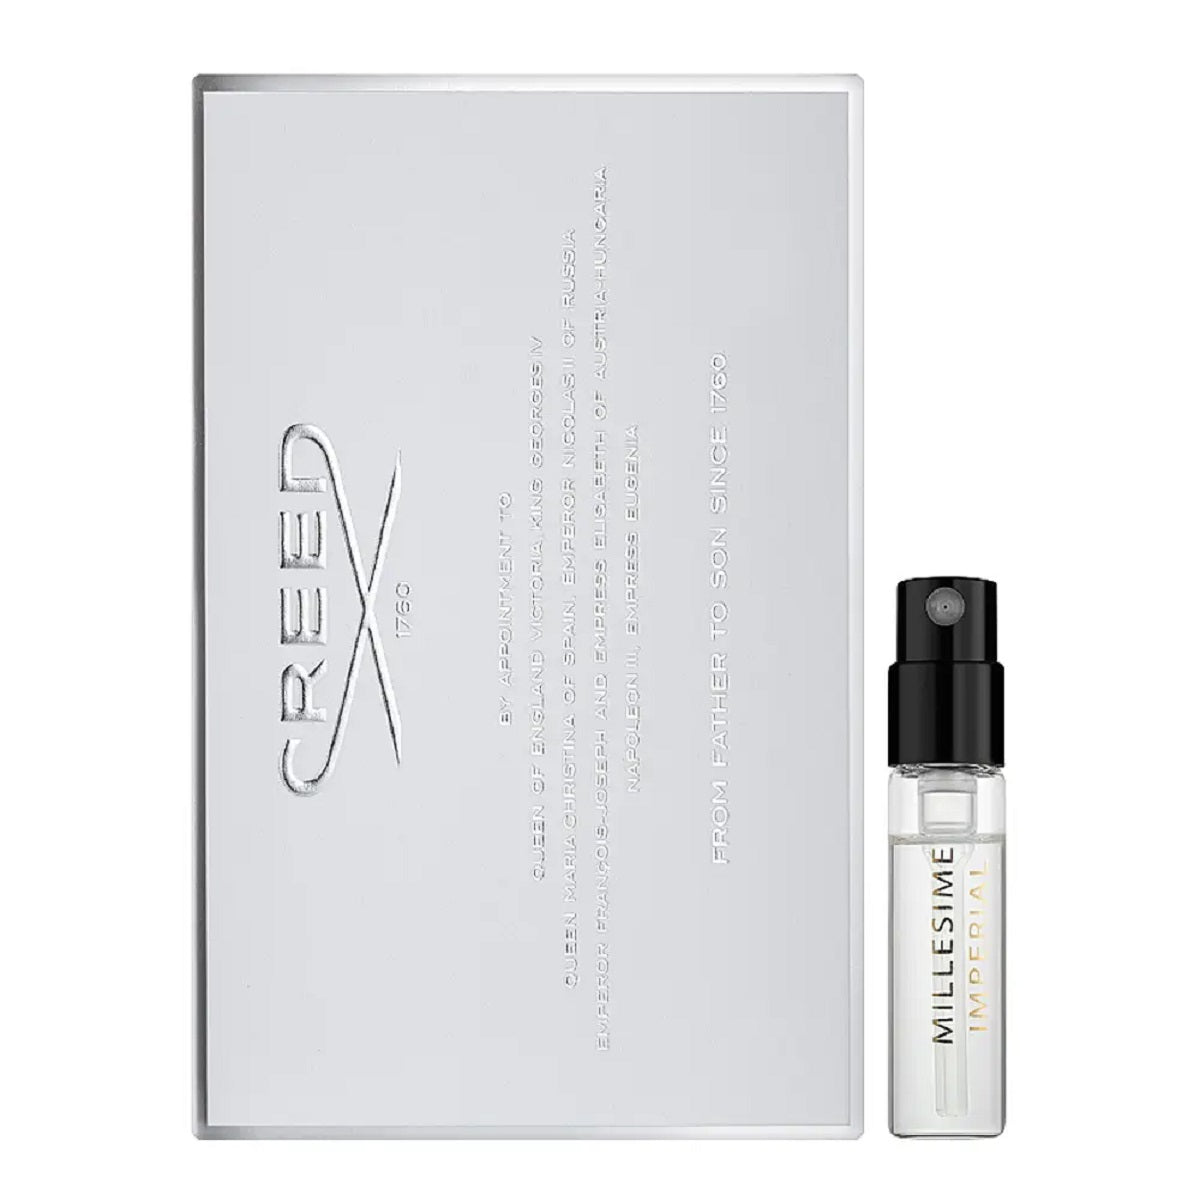 Creed Millesime Imperial edp 2ml 0.06 fl. uncja ,  Creed Millesime Imperial edp 2ml 0.06 fl. oz официална парфюмна проба,  Creed Millesime Imperial edp 2ml 0.06 fl. oz échantillon de parfum officiel,  Creed Millesime Imperial edp 2ml 0.06 fl. oz virallinen hajuvesinäyte,  Creed Millesime Imperial edp 2ml 0.06 fl. oz oficjalna próbka perfum,  Creed Millesime Imperial edp 2ml 0.06 fl. oz offizielle Parfümprobe,  Creed Millesime Imperial edp 2ml 0.06 fl. oz officielt parfymprov